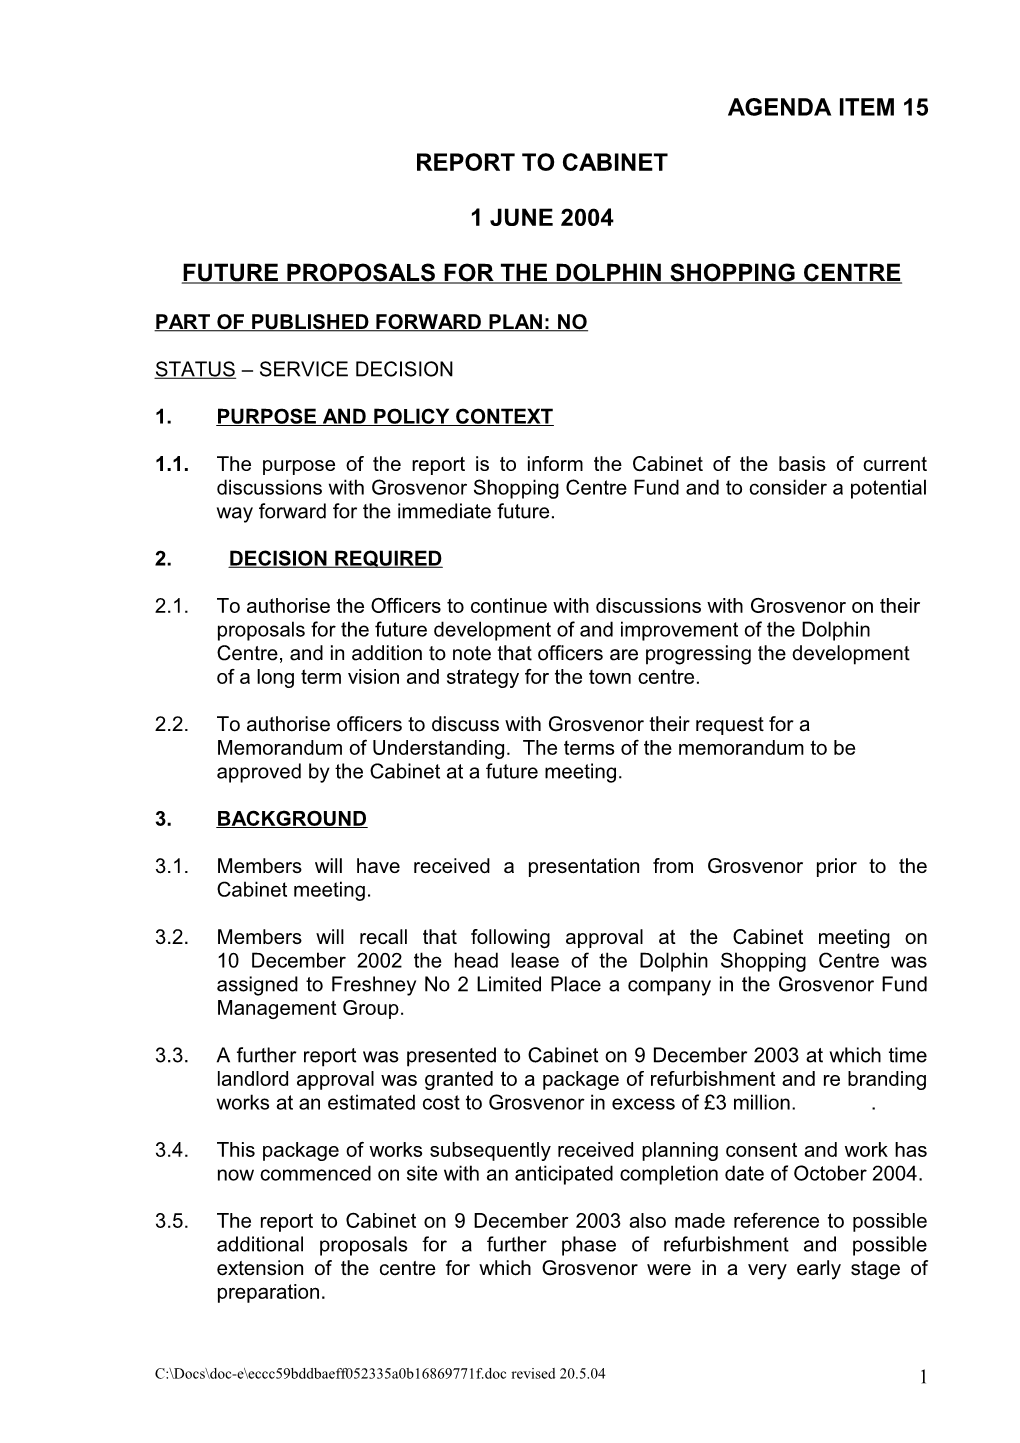 Future Proposals for the Dolphin Shopping Centre